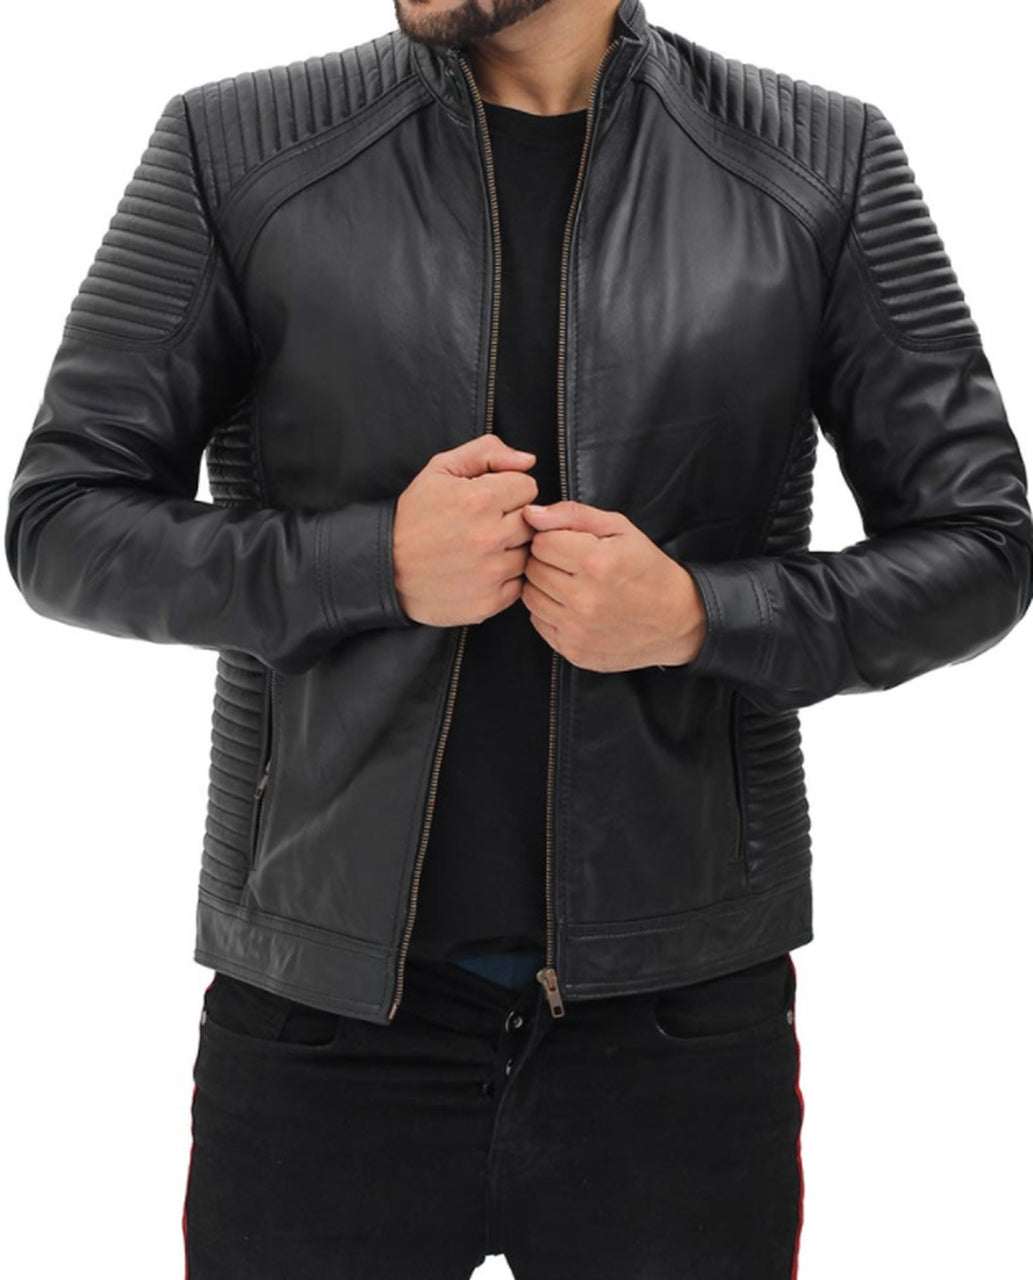 Men Fitted Geniune Leather Jacket With Shoulder Lining Padding